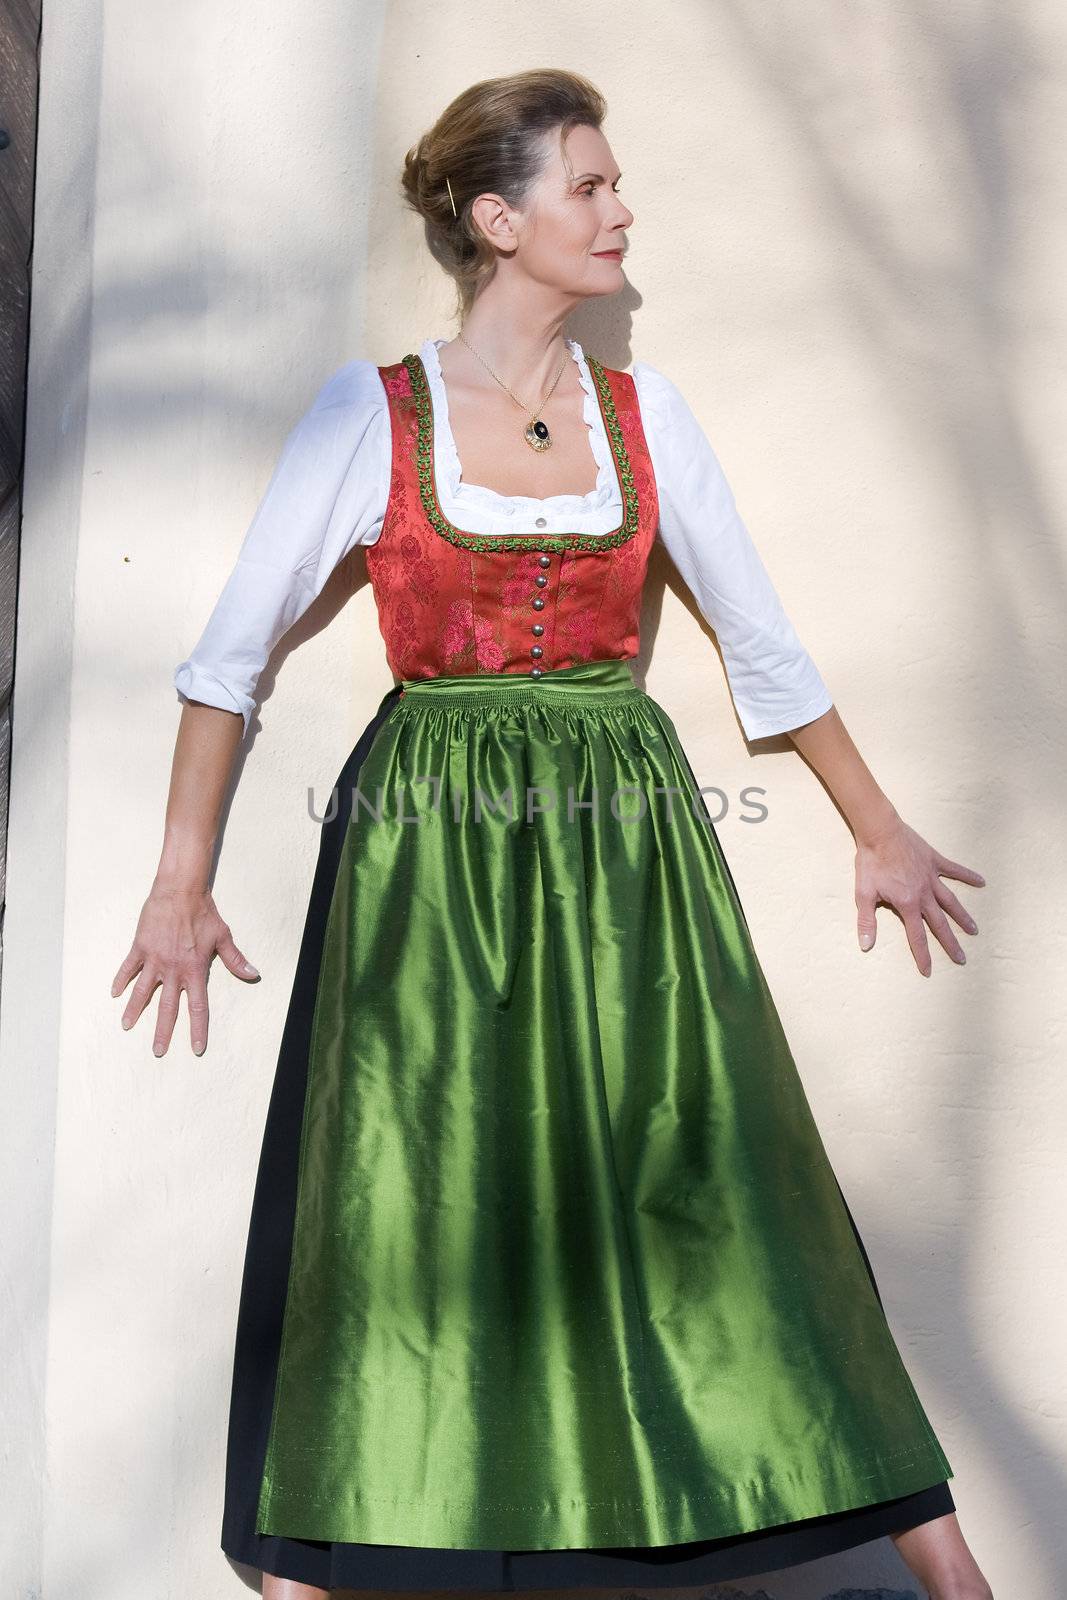 Old Bavarian woman in fashionable festive costume